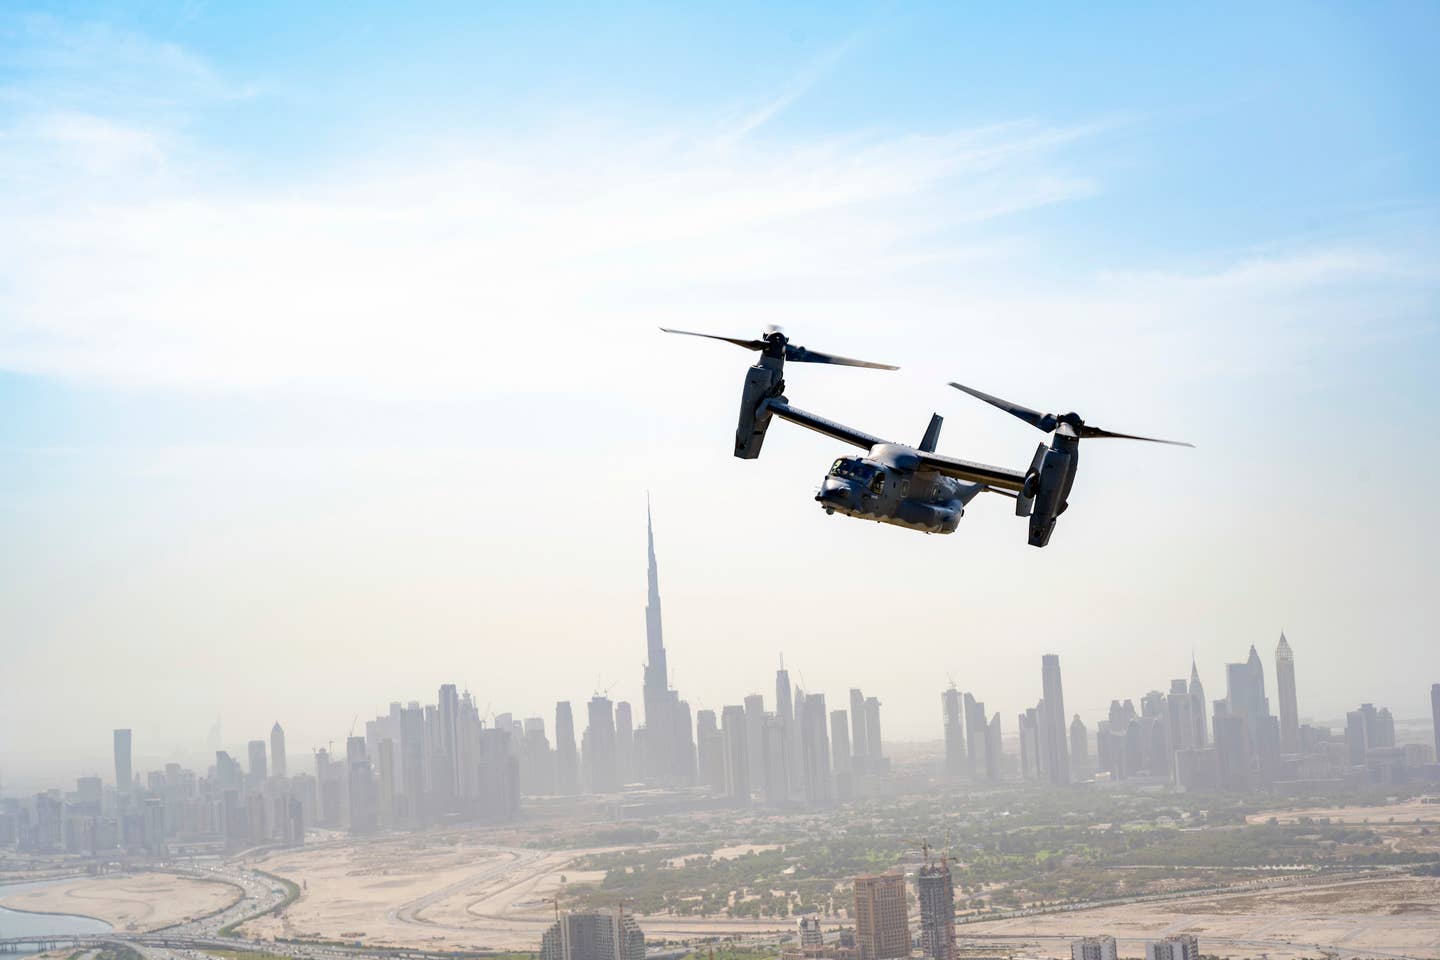 A U.S. Air Force CV-22 Osprey assigned to the 8th Expeditionary Special Operations Squadron, takes part in a photo chase mission around Dubai, United Arab Emirates, Sept 16, 2021. (U.S. Air Force photo by Master Sgt. Wolfram M. Stumpf)